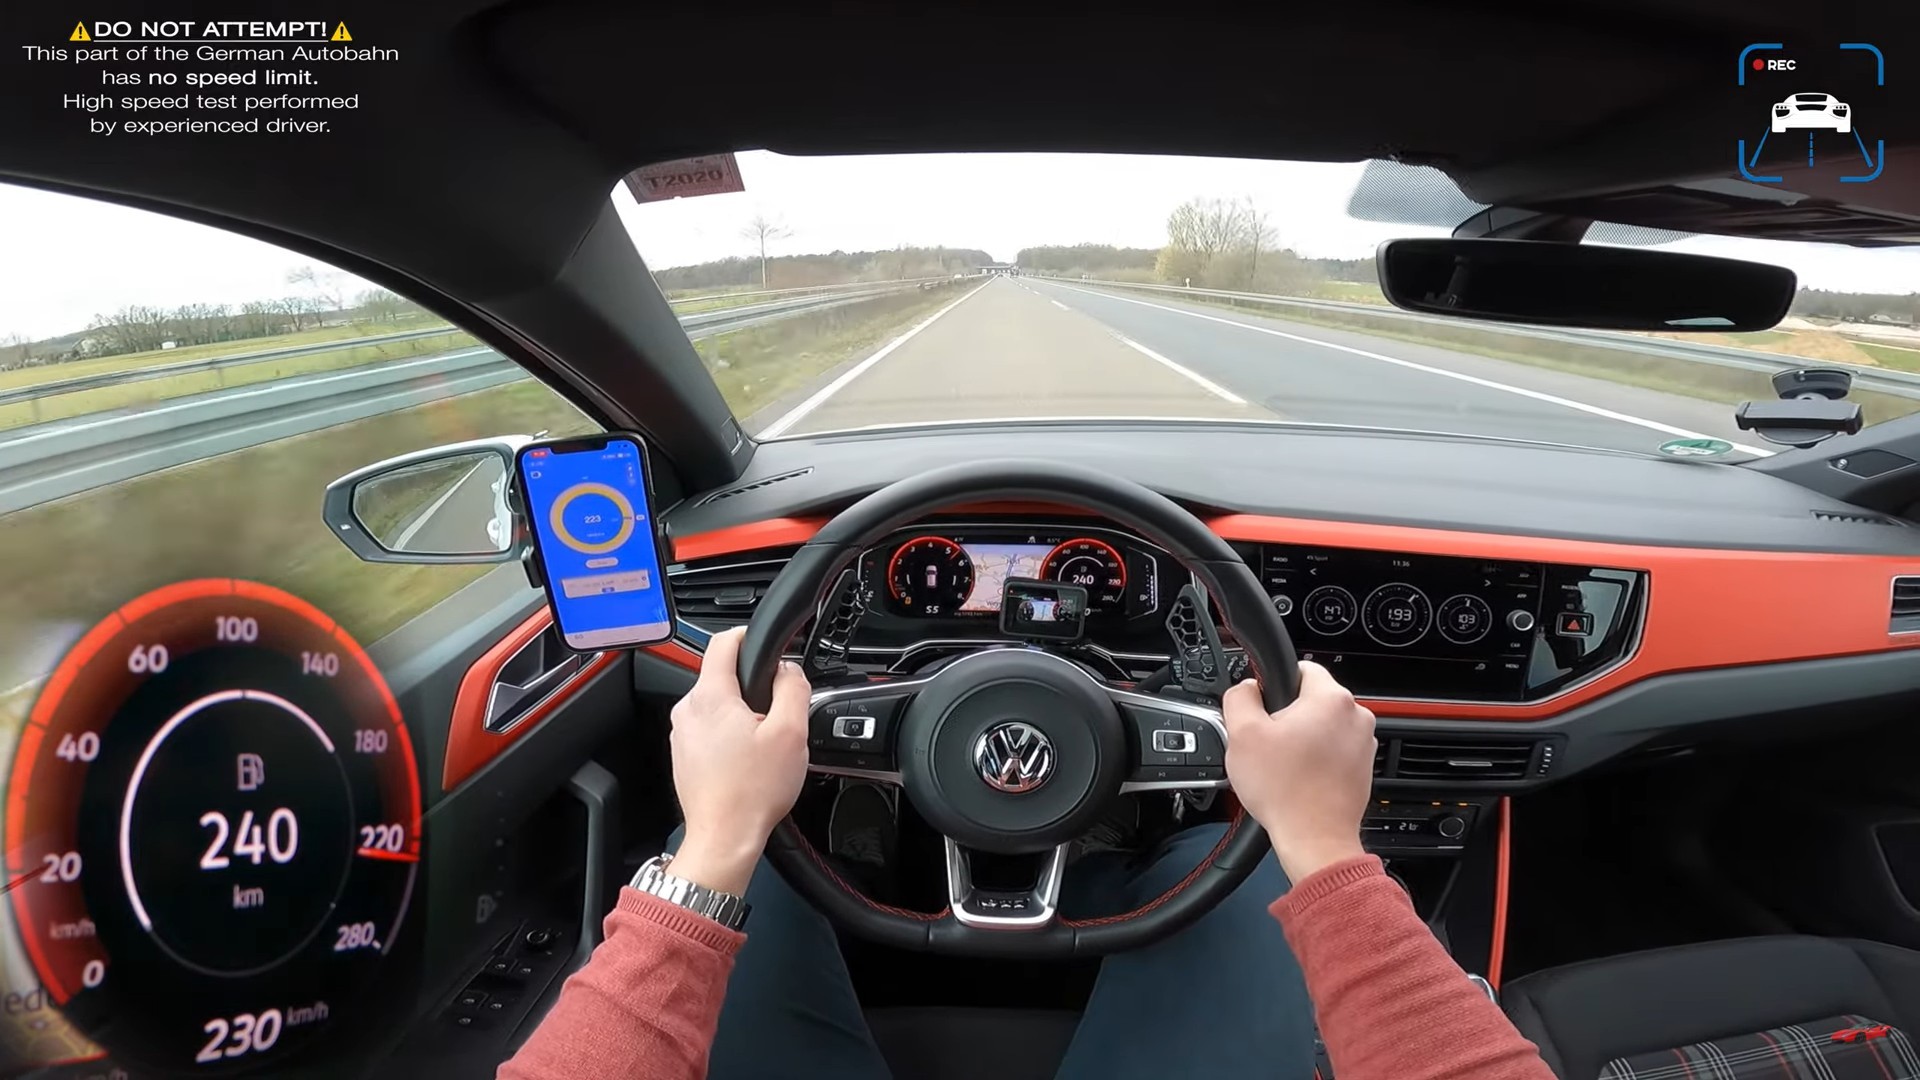 2021 VW Polo GTI Hits 149 MPH After Bumpy Autobahn Ride, Has Very